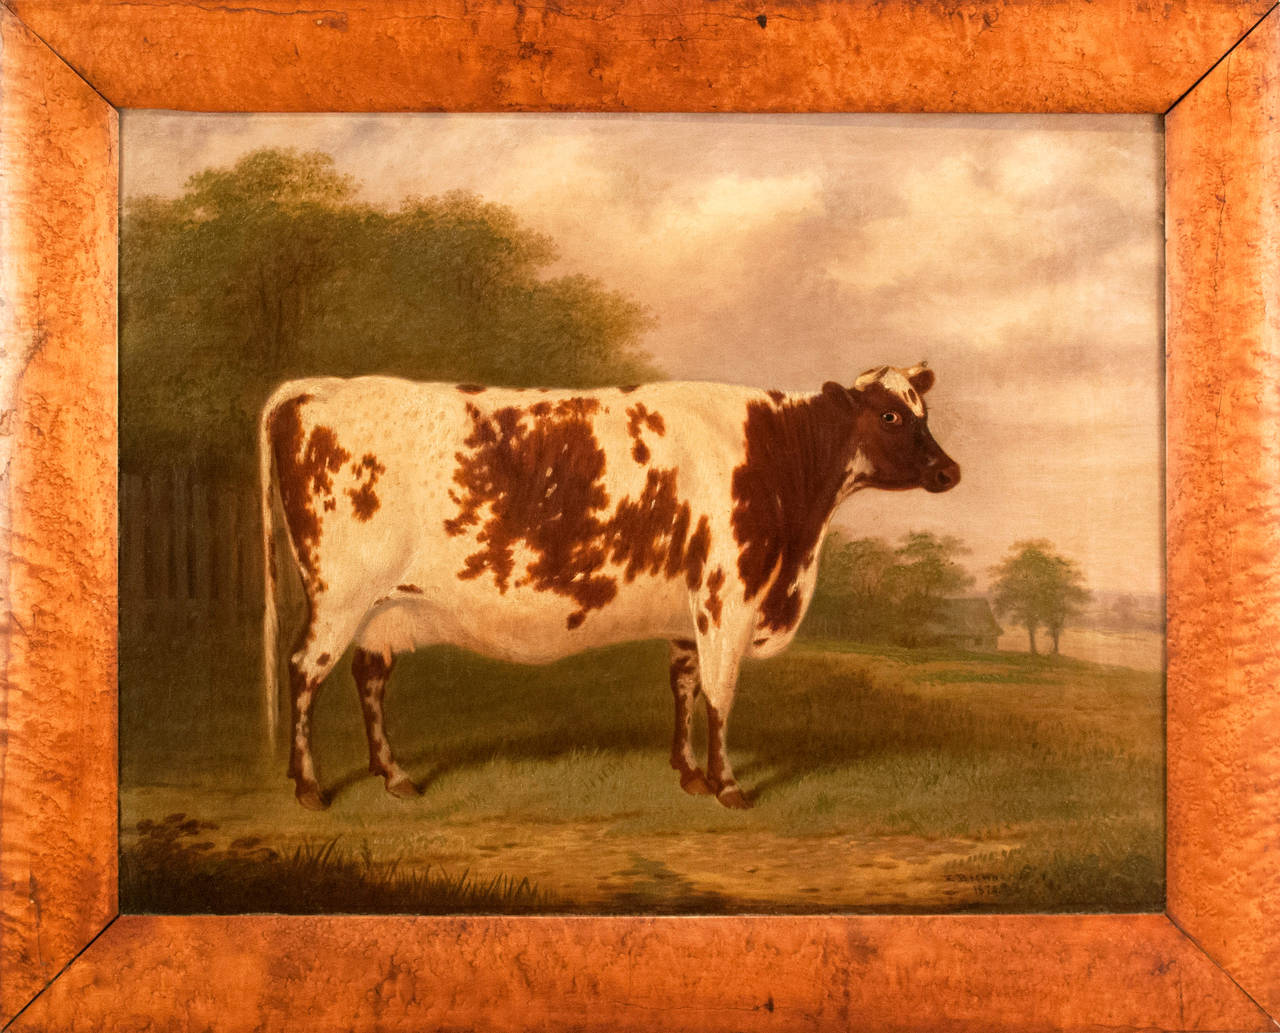 E. Brown Animal Painting - Cow in a Landscape, 1874